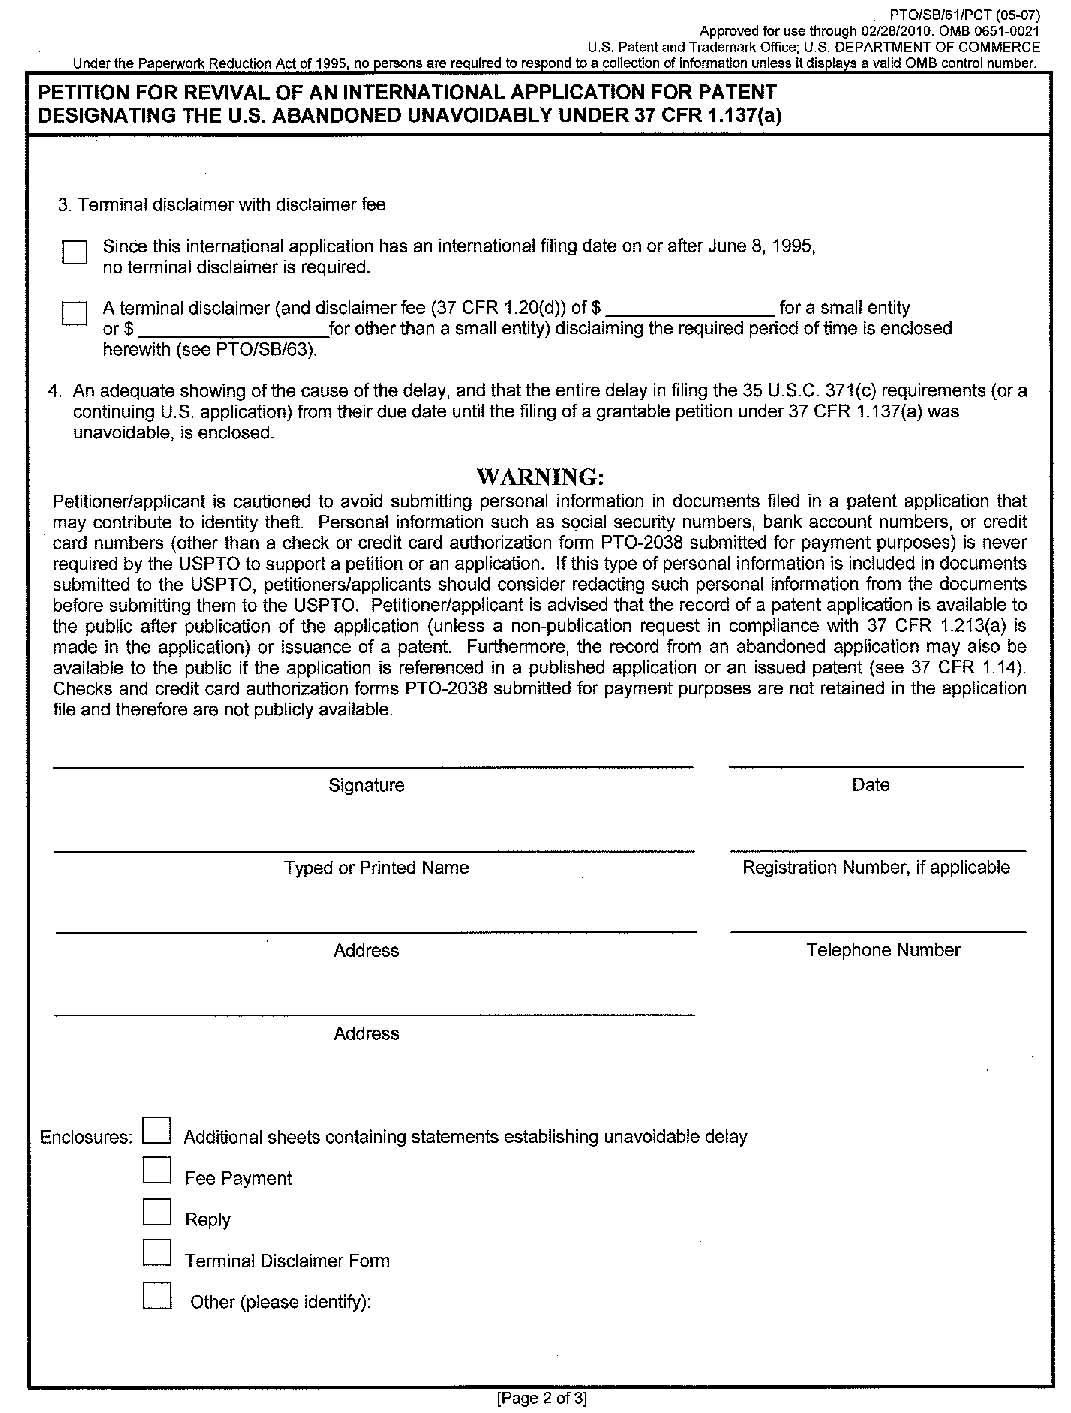 page 2  form pto/sb/61/pct petition for revival of an international application  for patent  designationg the u.s.  abandoned unavoidably under 37 cfr 1.l137(a).